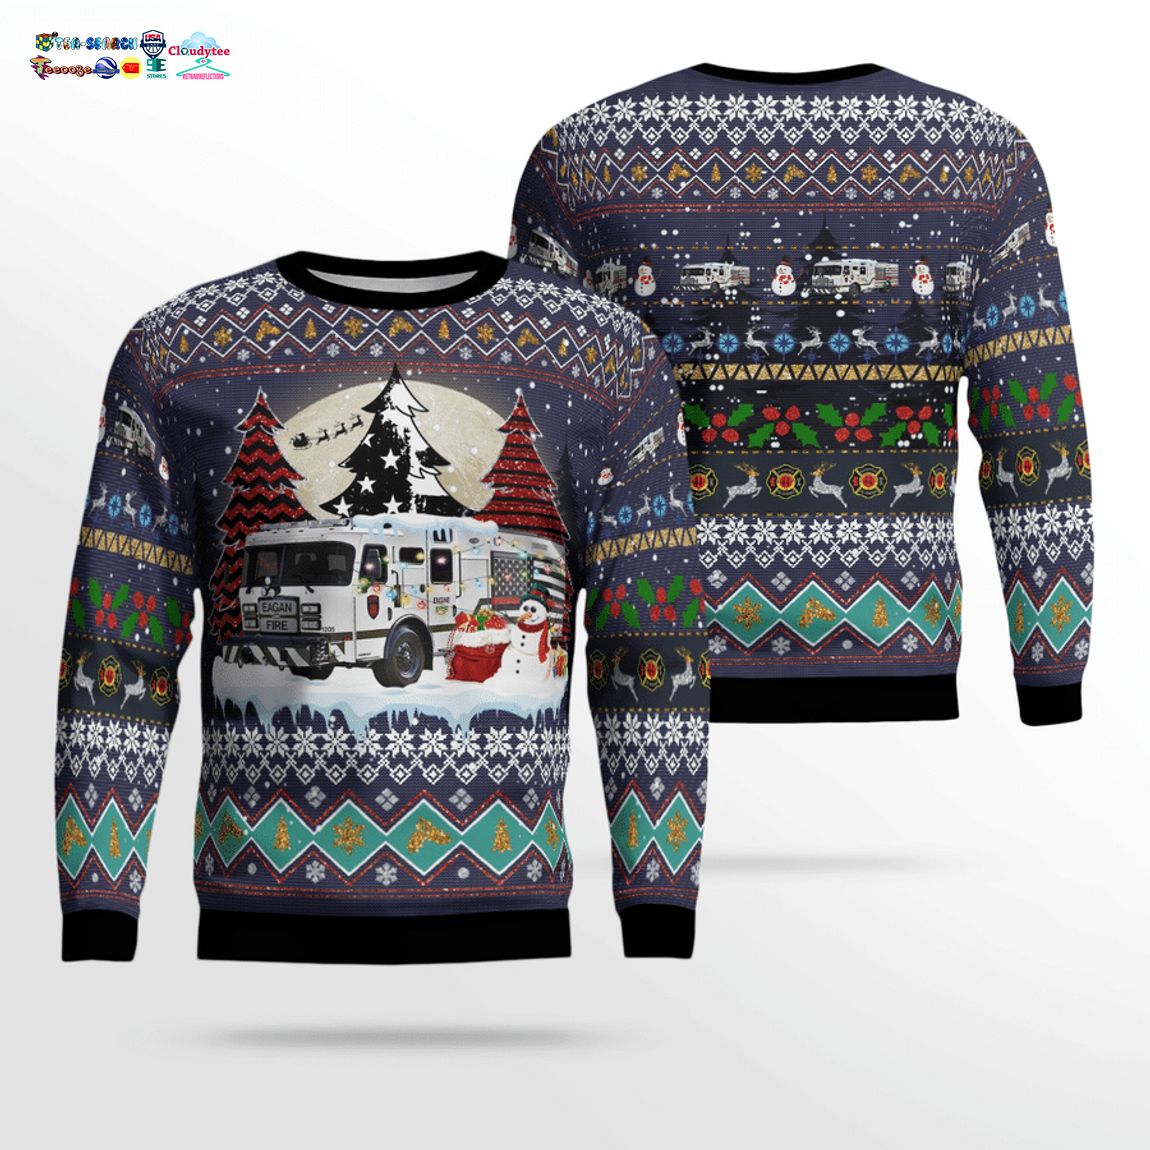 Eagan Fire Department Ver 2 3D Christmas Sweater - Looking so nice